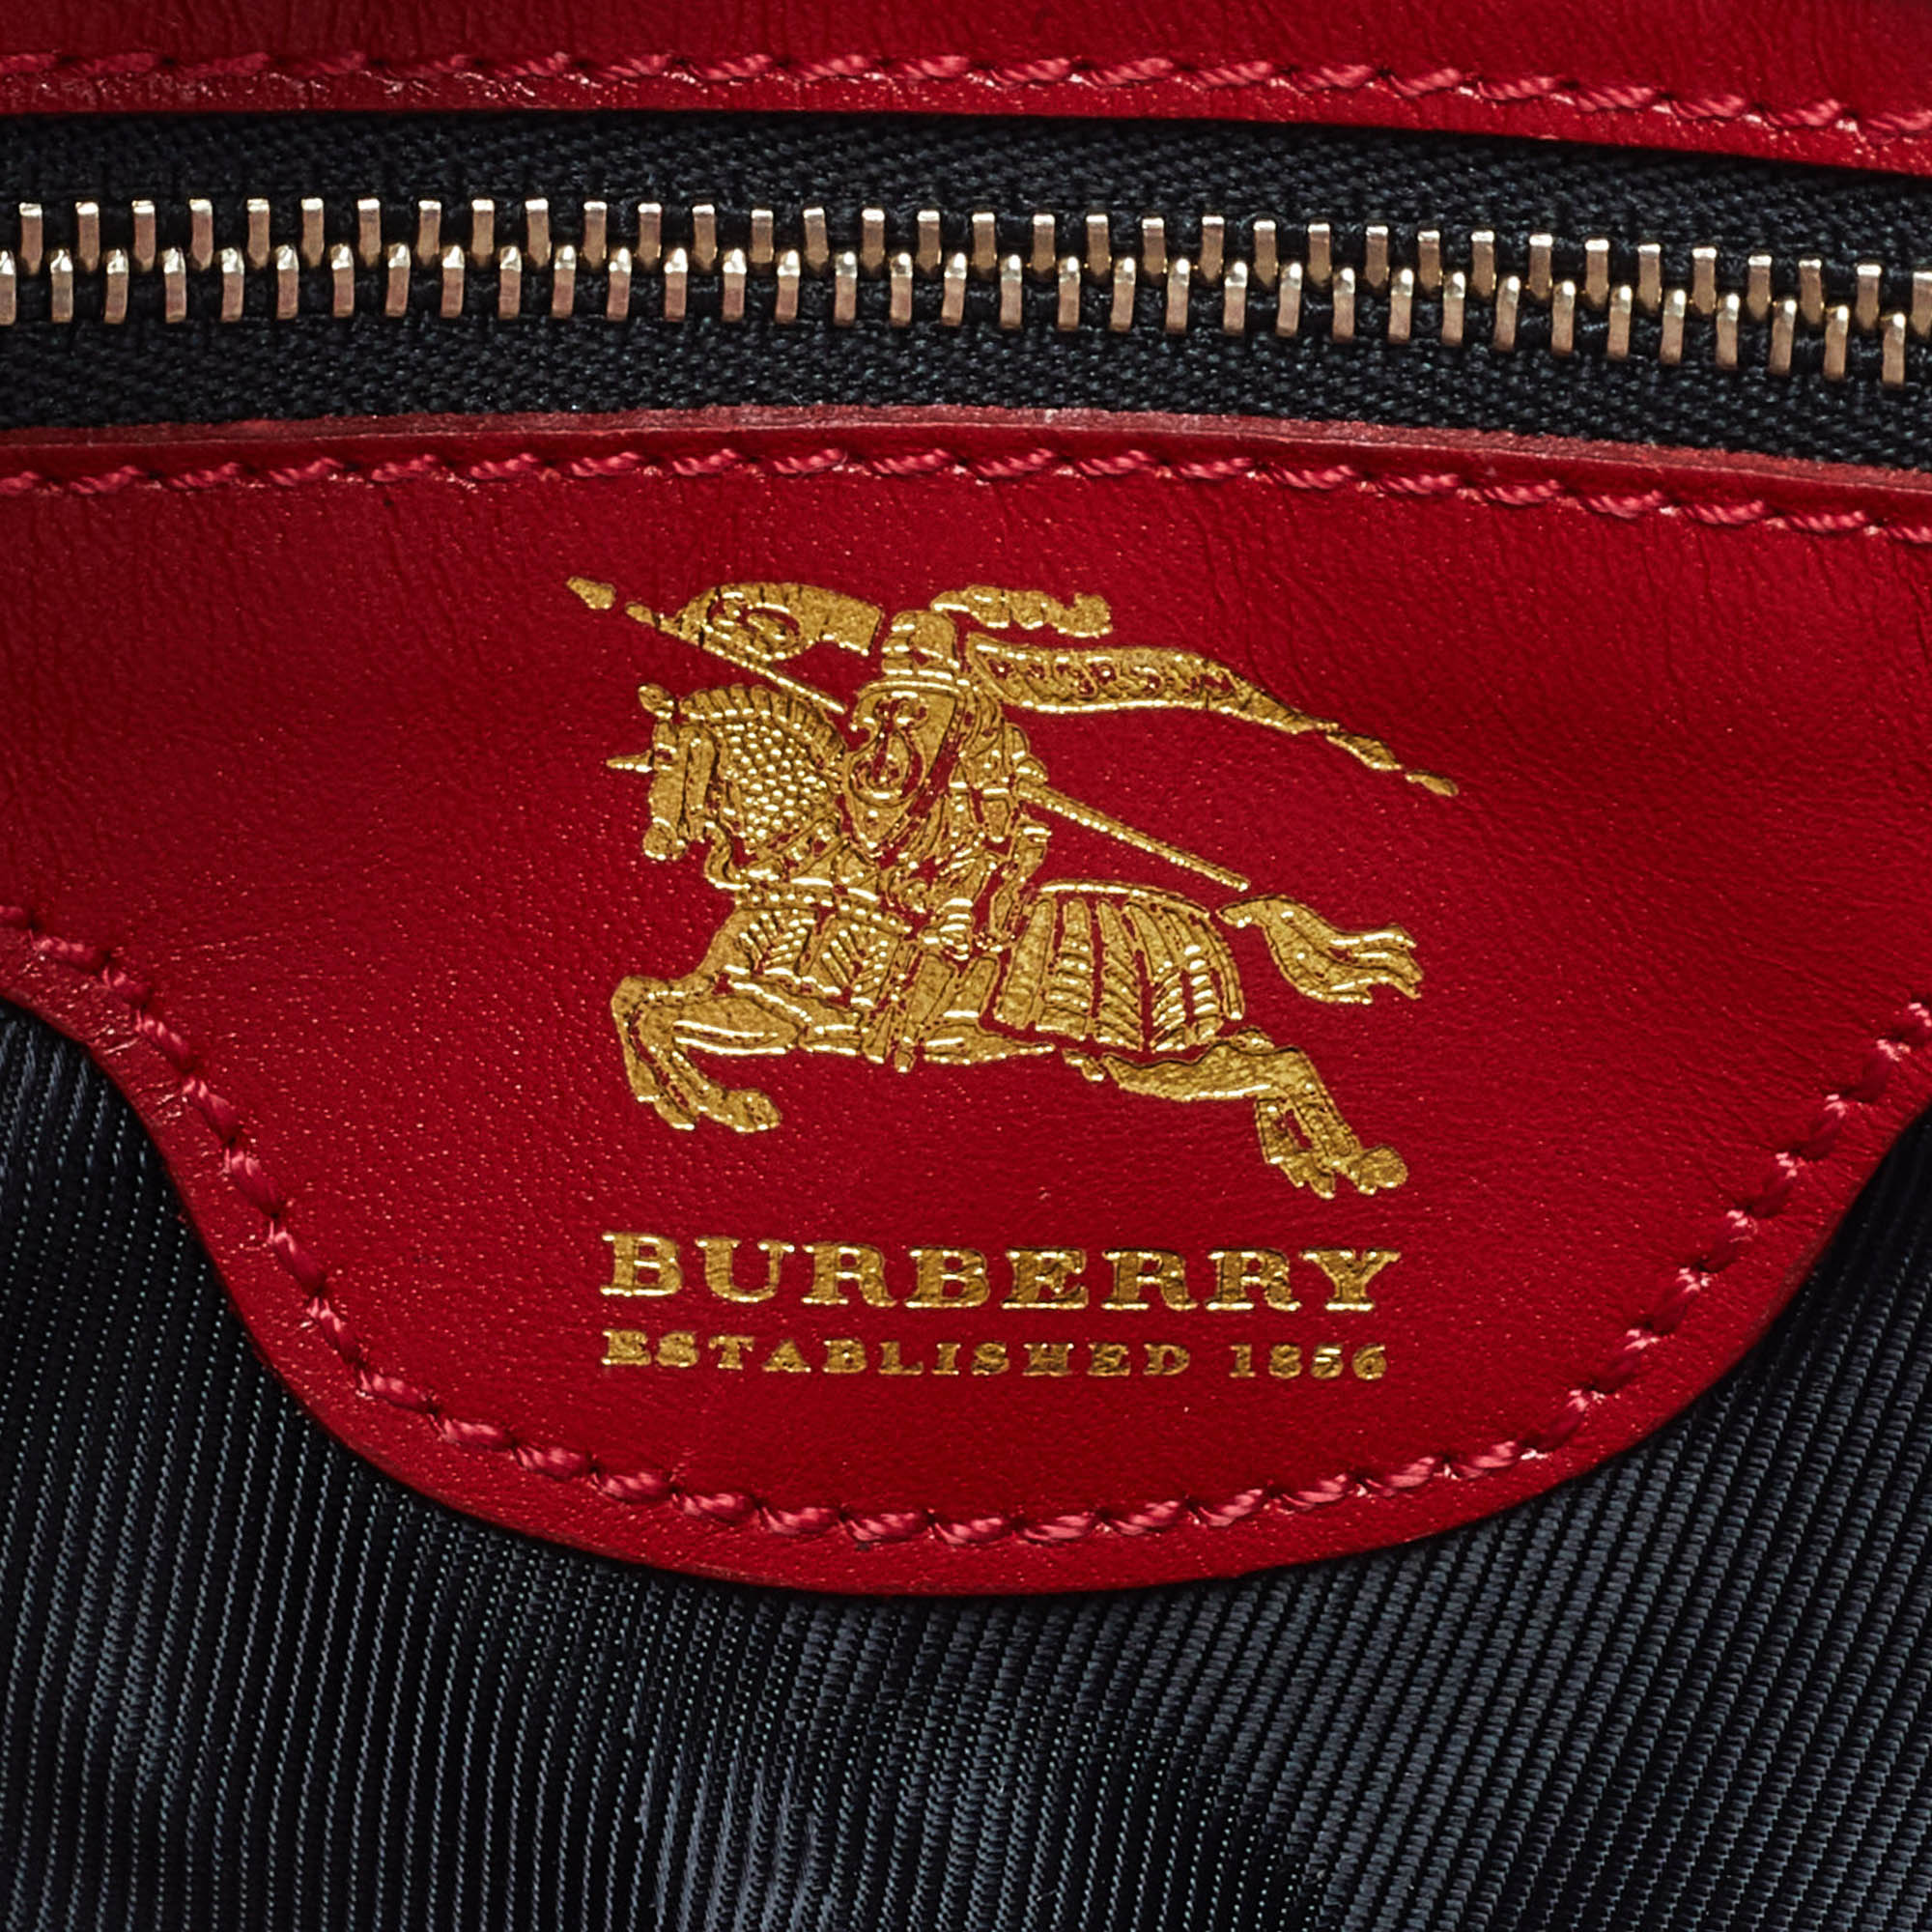 Burberry Red Quilted Leather Manor Satchel